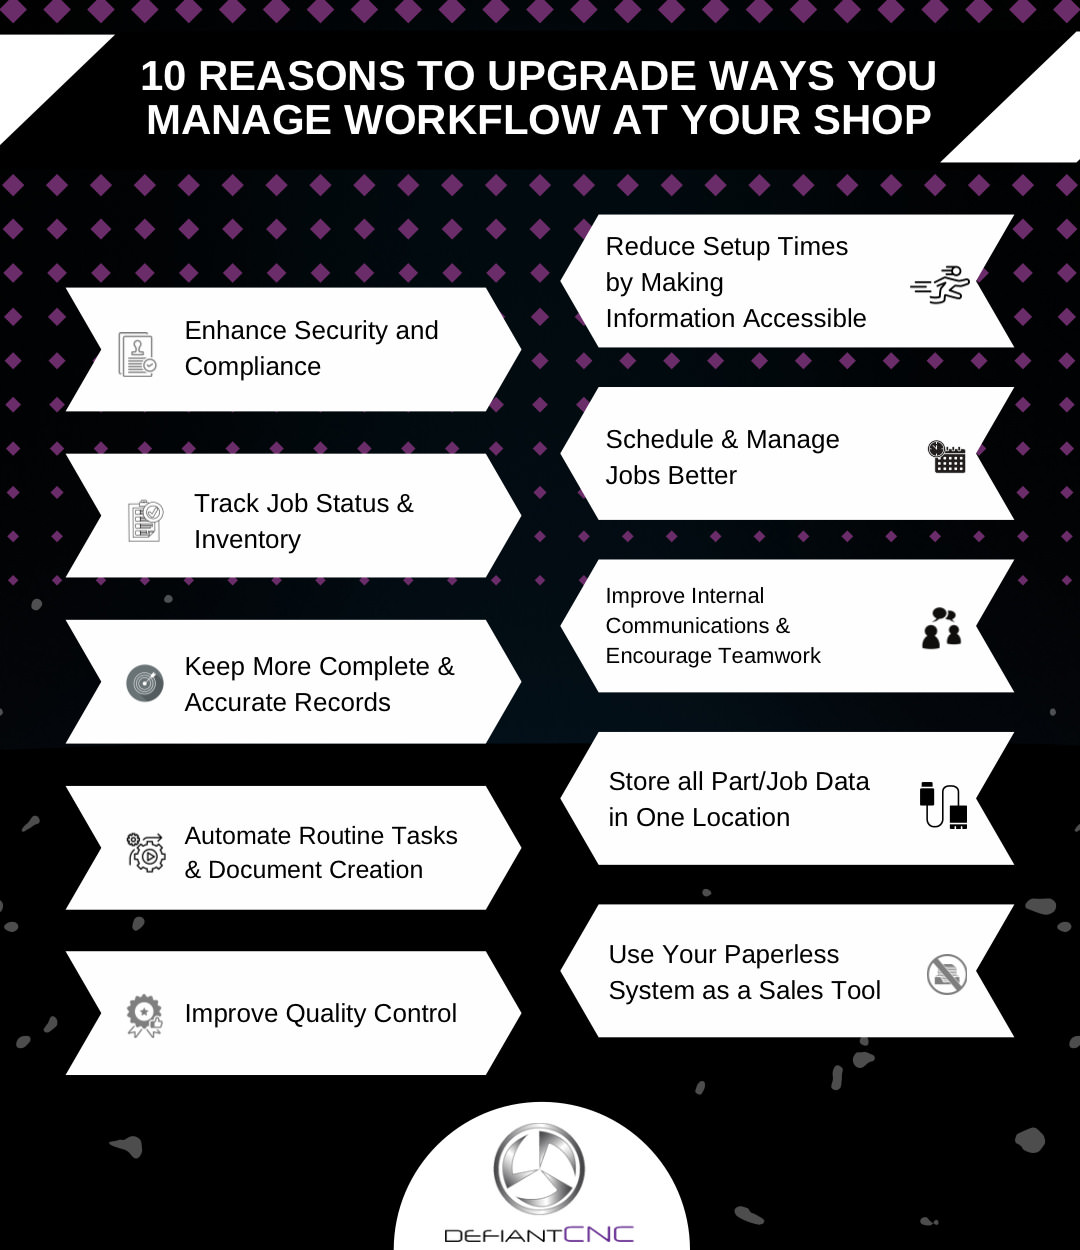 List of 10 reasons to upgrade the way you manage workflow at your advanced manufacturing shop with Airtable.